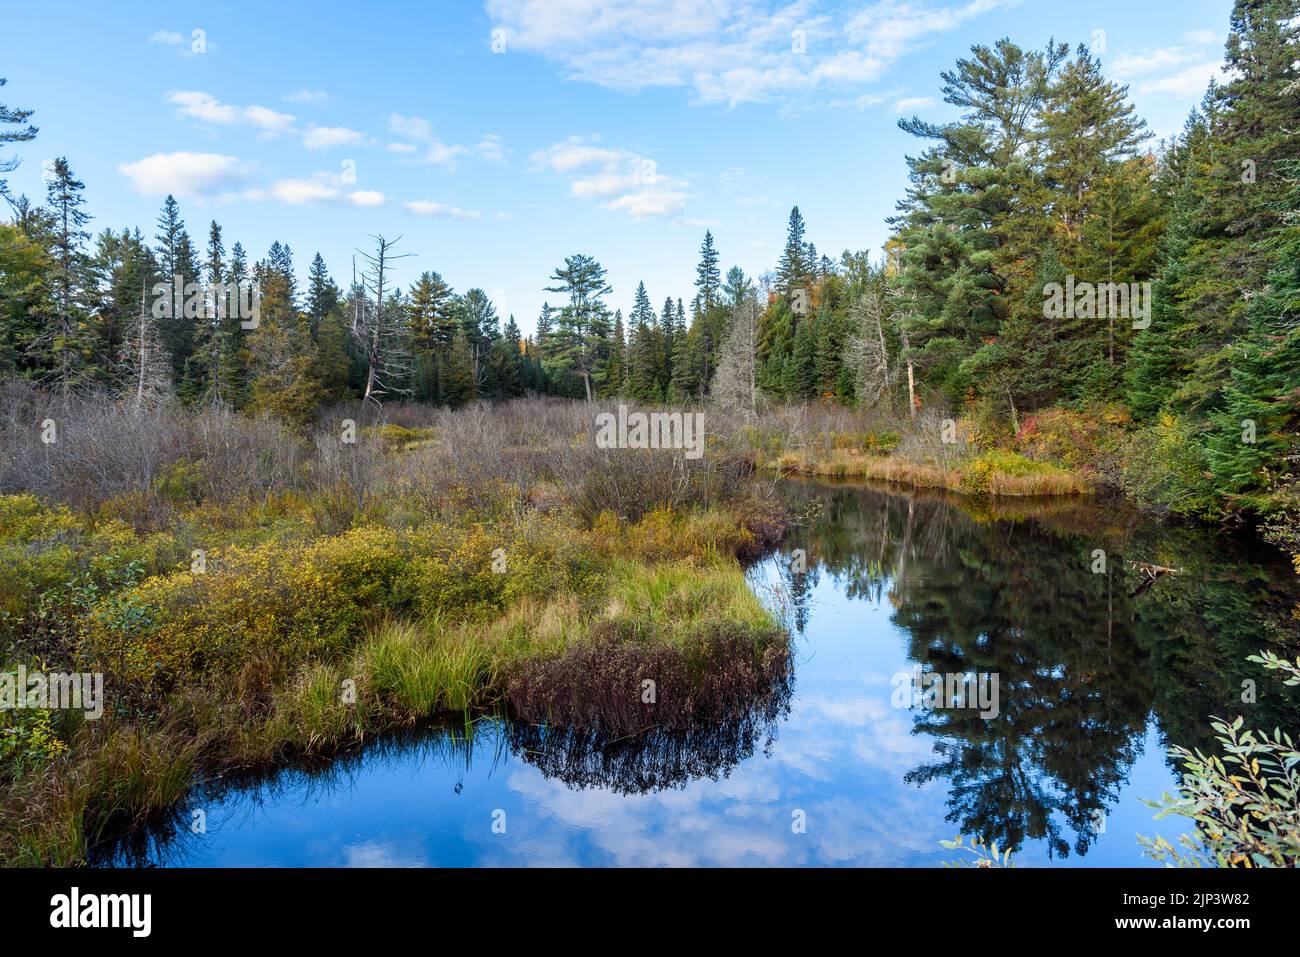 Wetland in a pine forest on a clear autumn day. Sky reflecting in the calm waters. Stock Photo